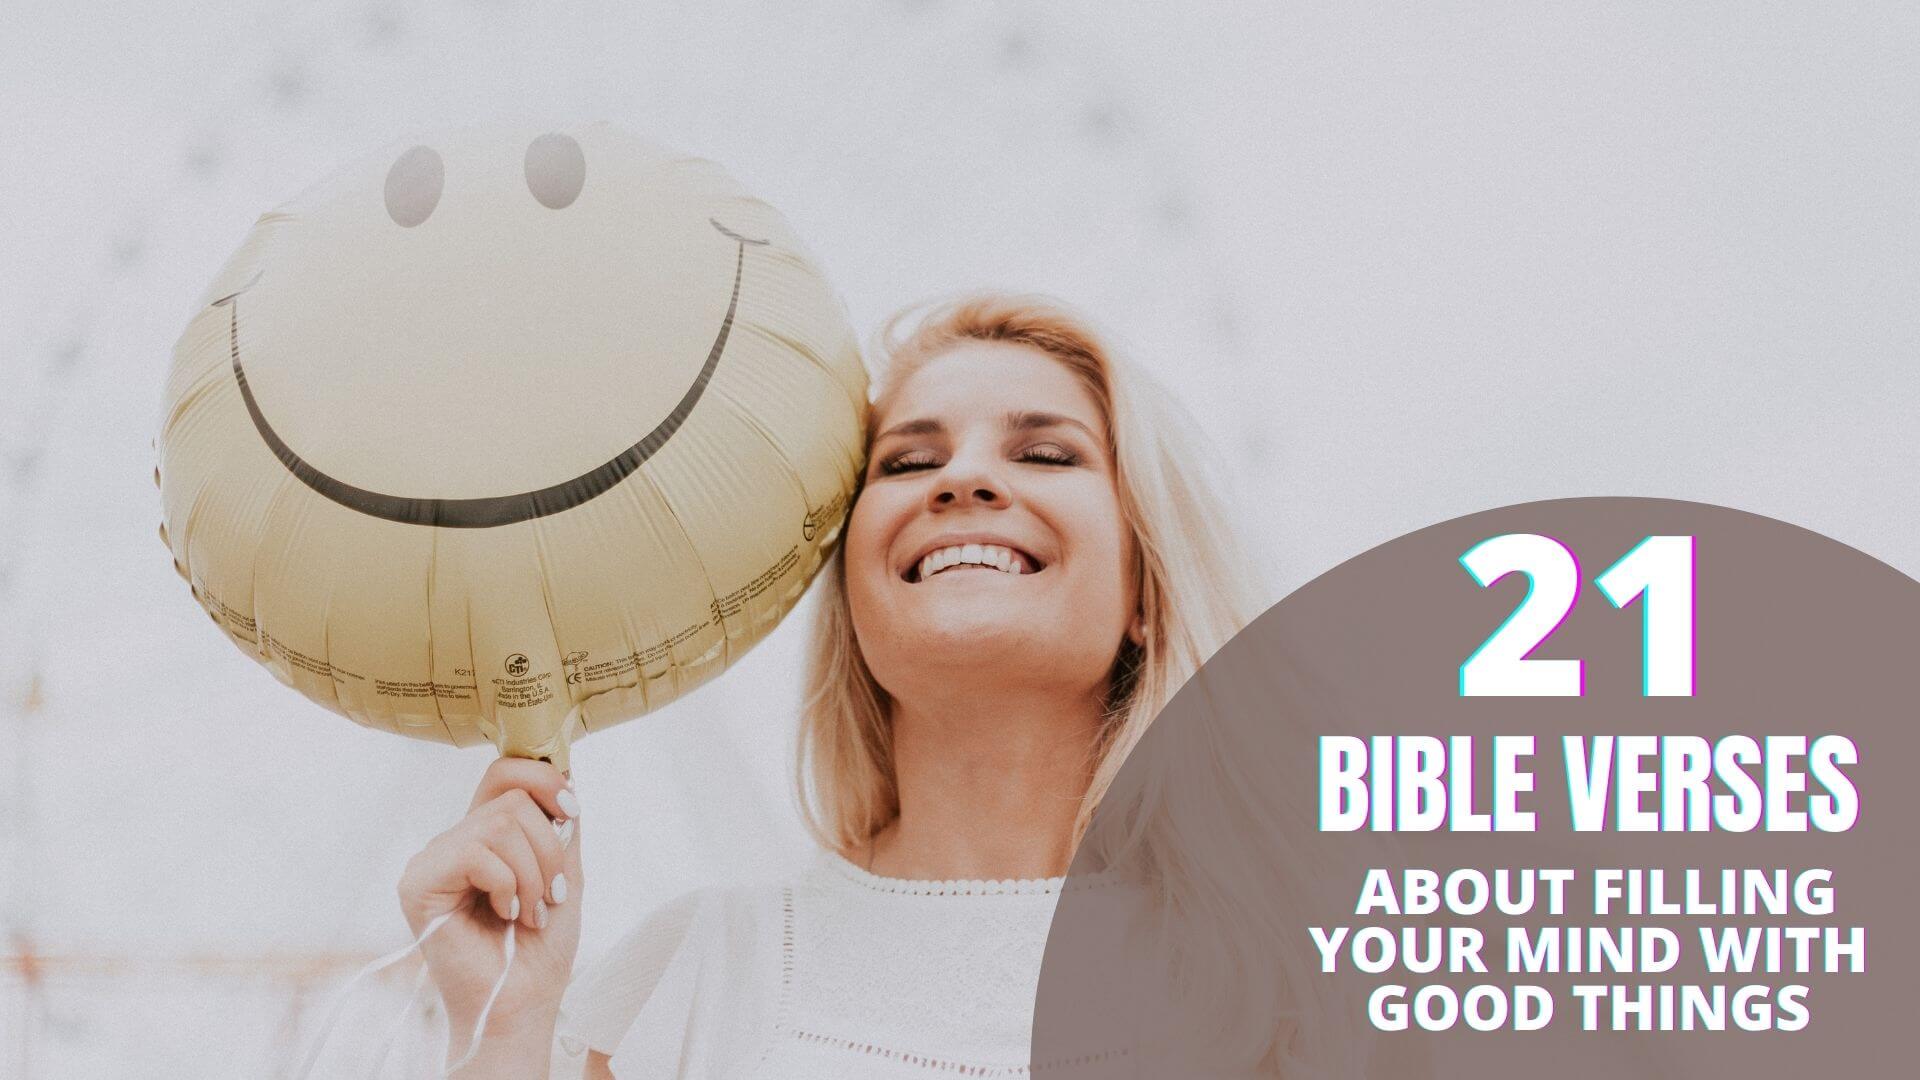 17 Bible Verse About Filling Your Mind With Good Things 